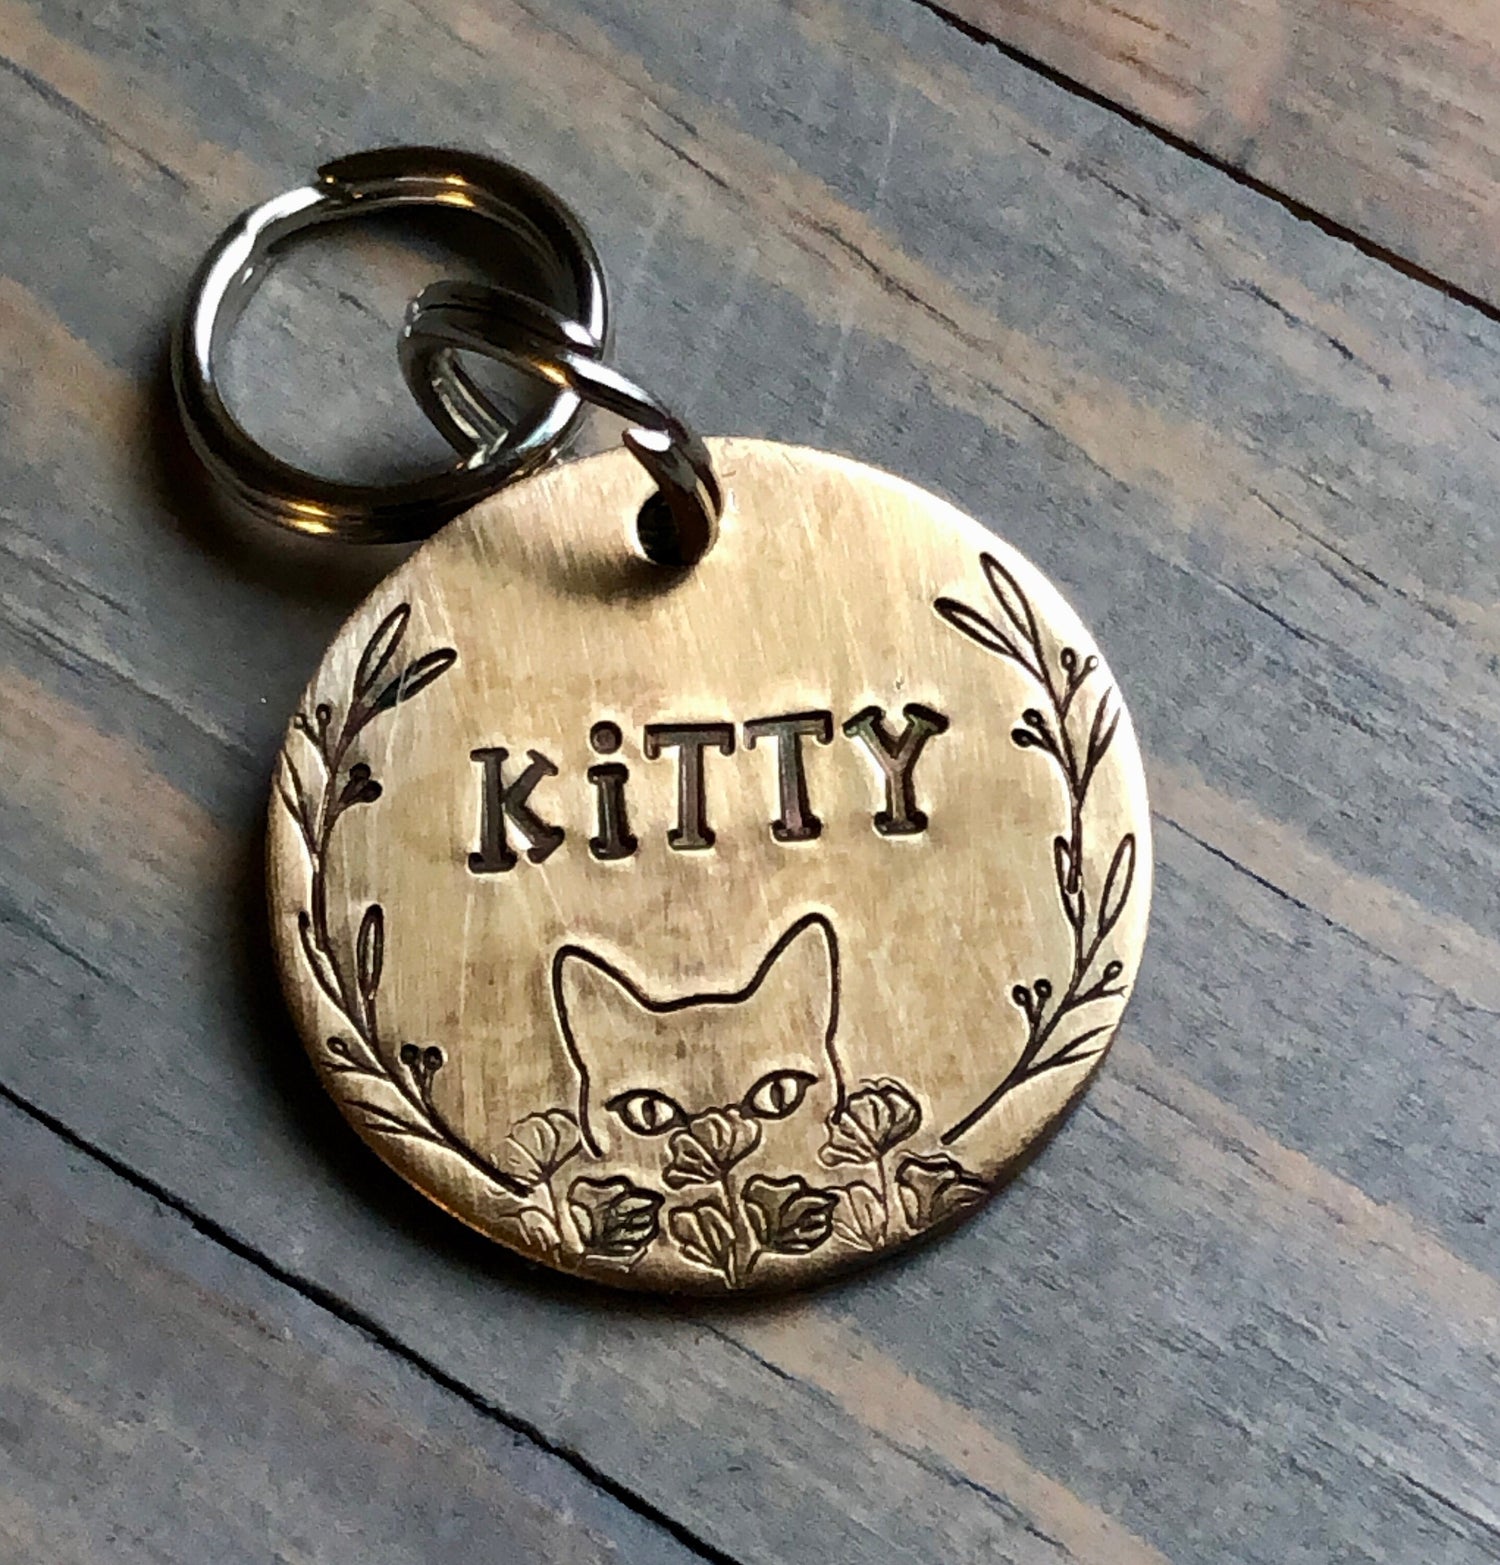 Name Tag for Cat, Hand Stamped Pet ID Tag, Kitty, Personalized Cat Tag for Kitty, Tag with Flowers, Kitten